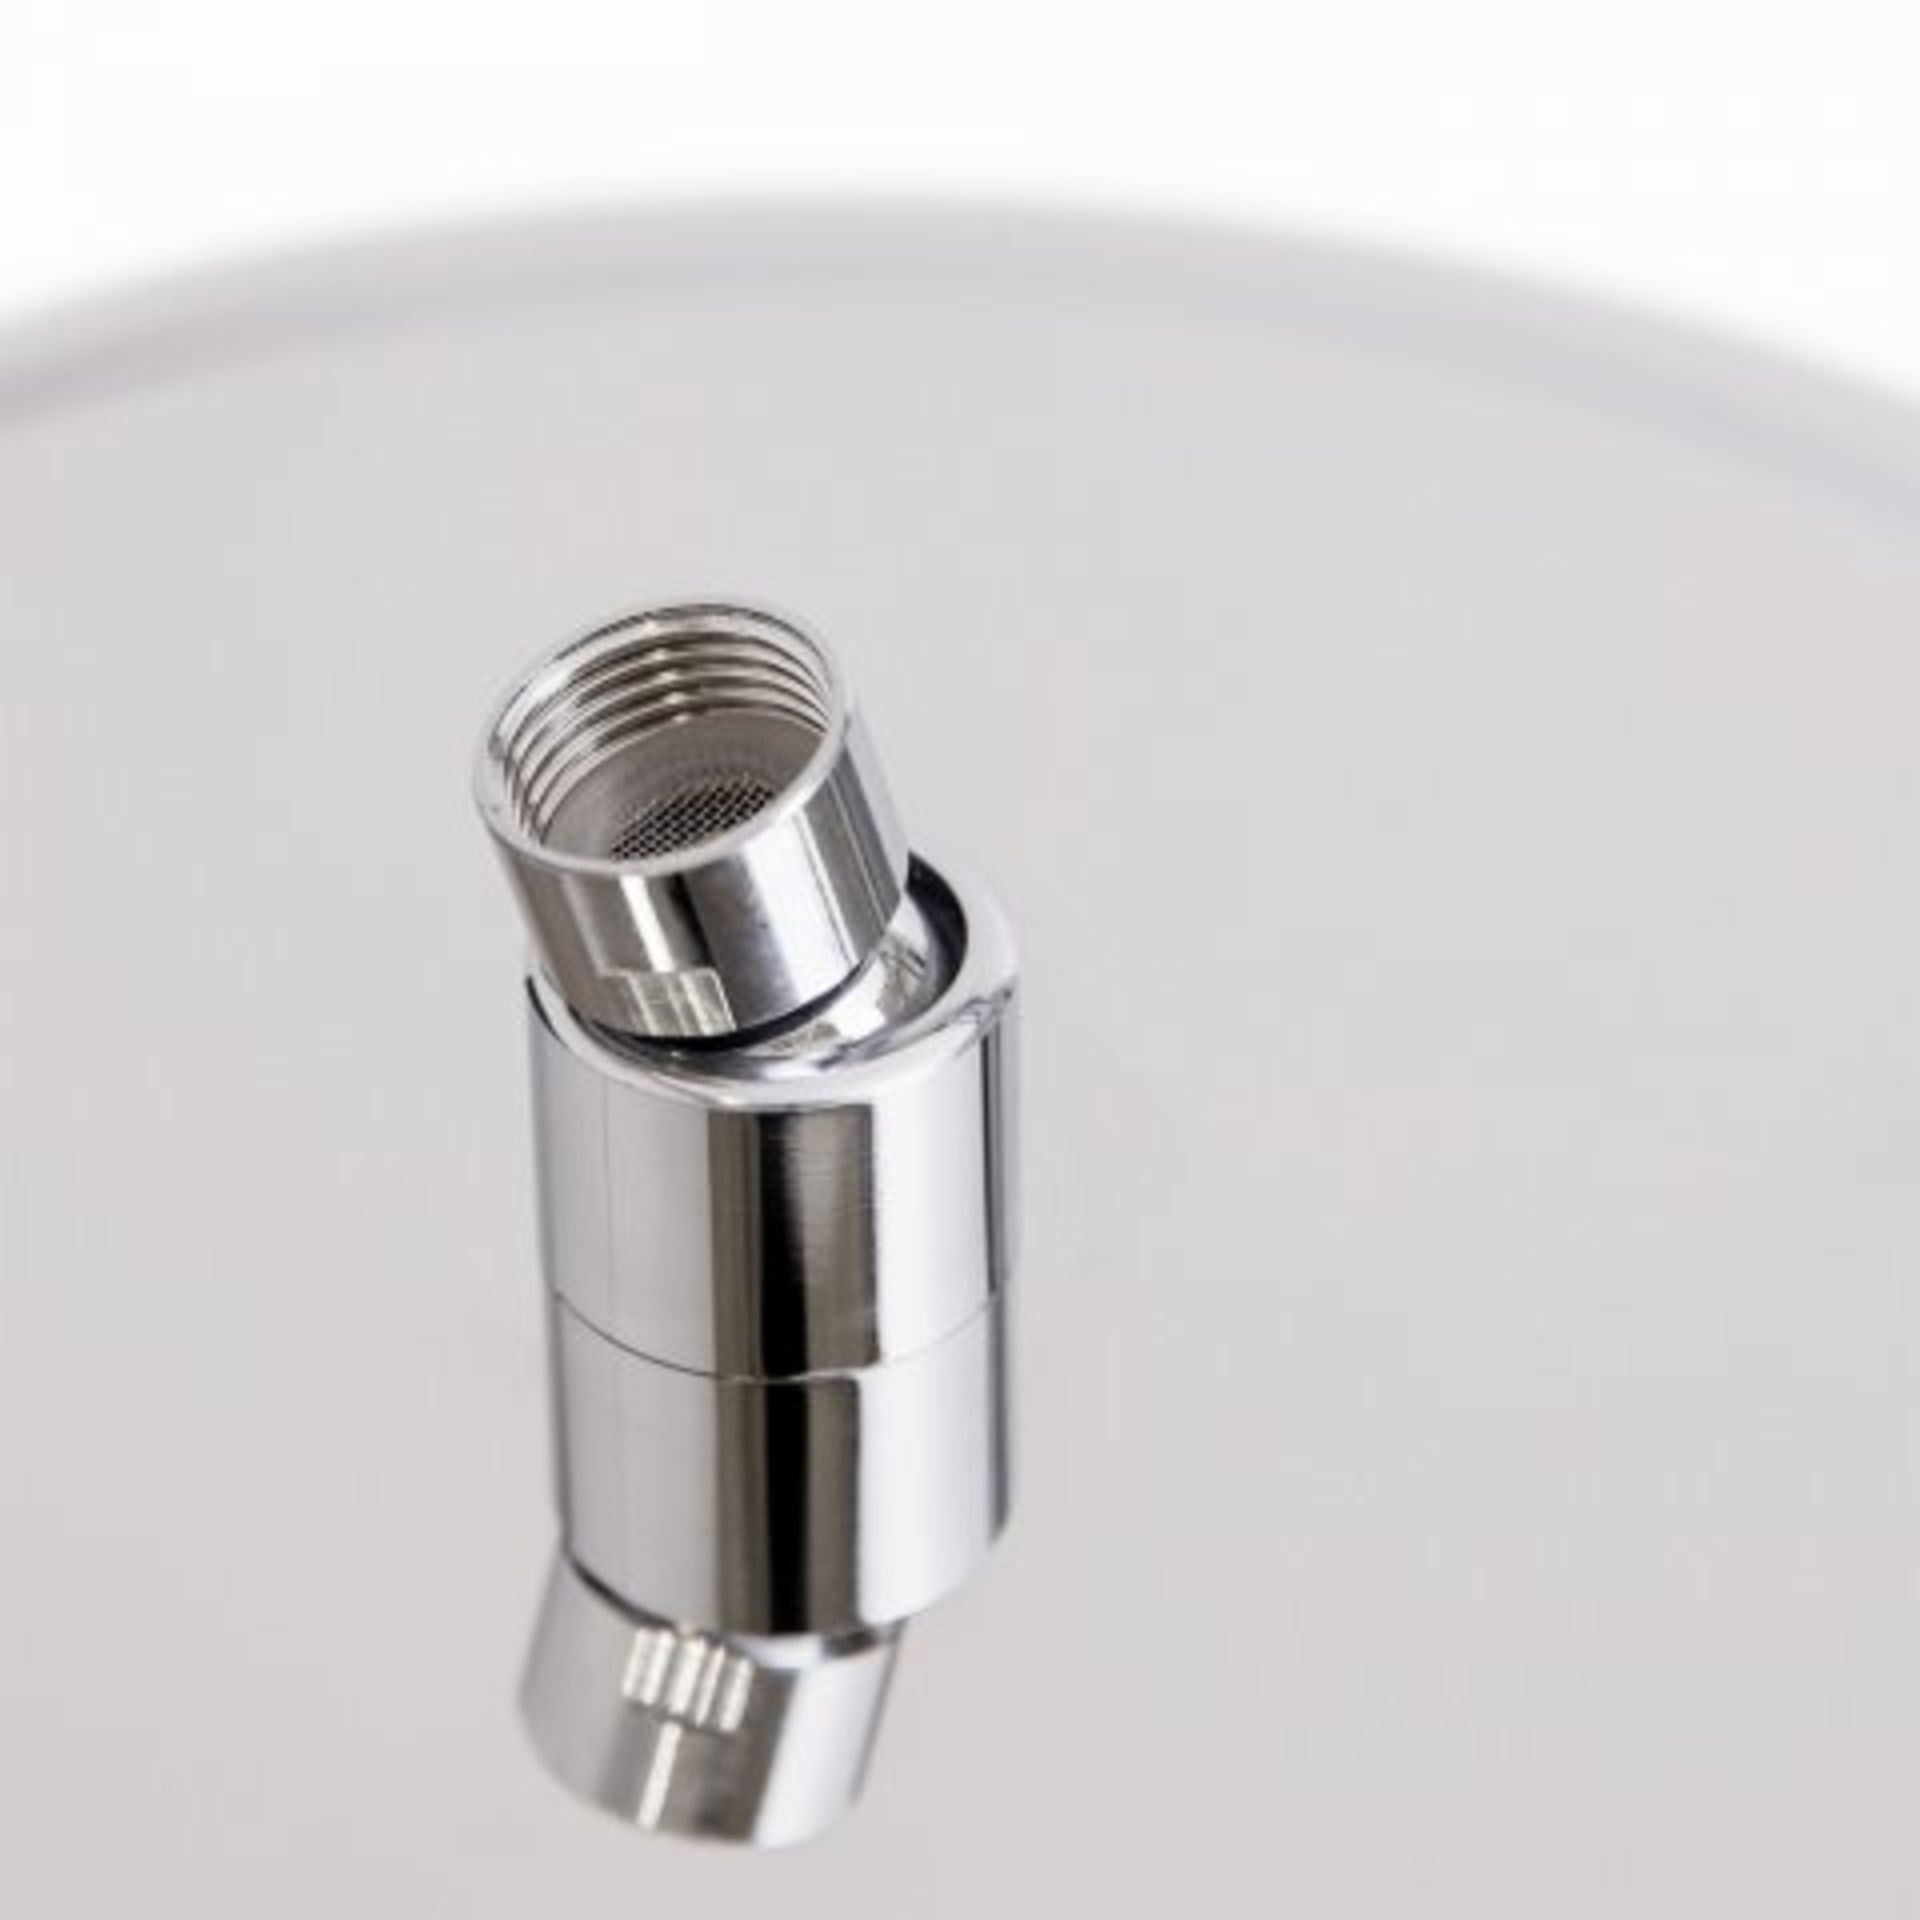 (V89) Round Exposed Thermostatic Mixer Shower Kit & Large Shower Head Designer Style Our - Image 6 of 7